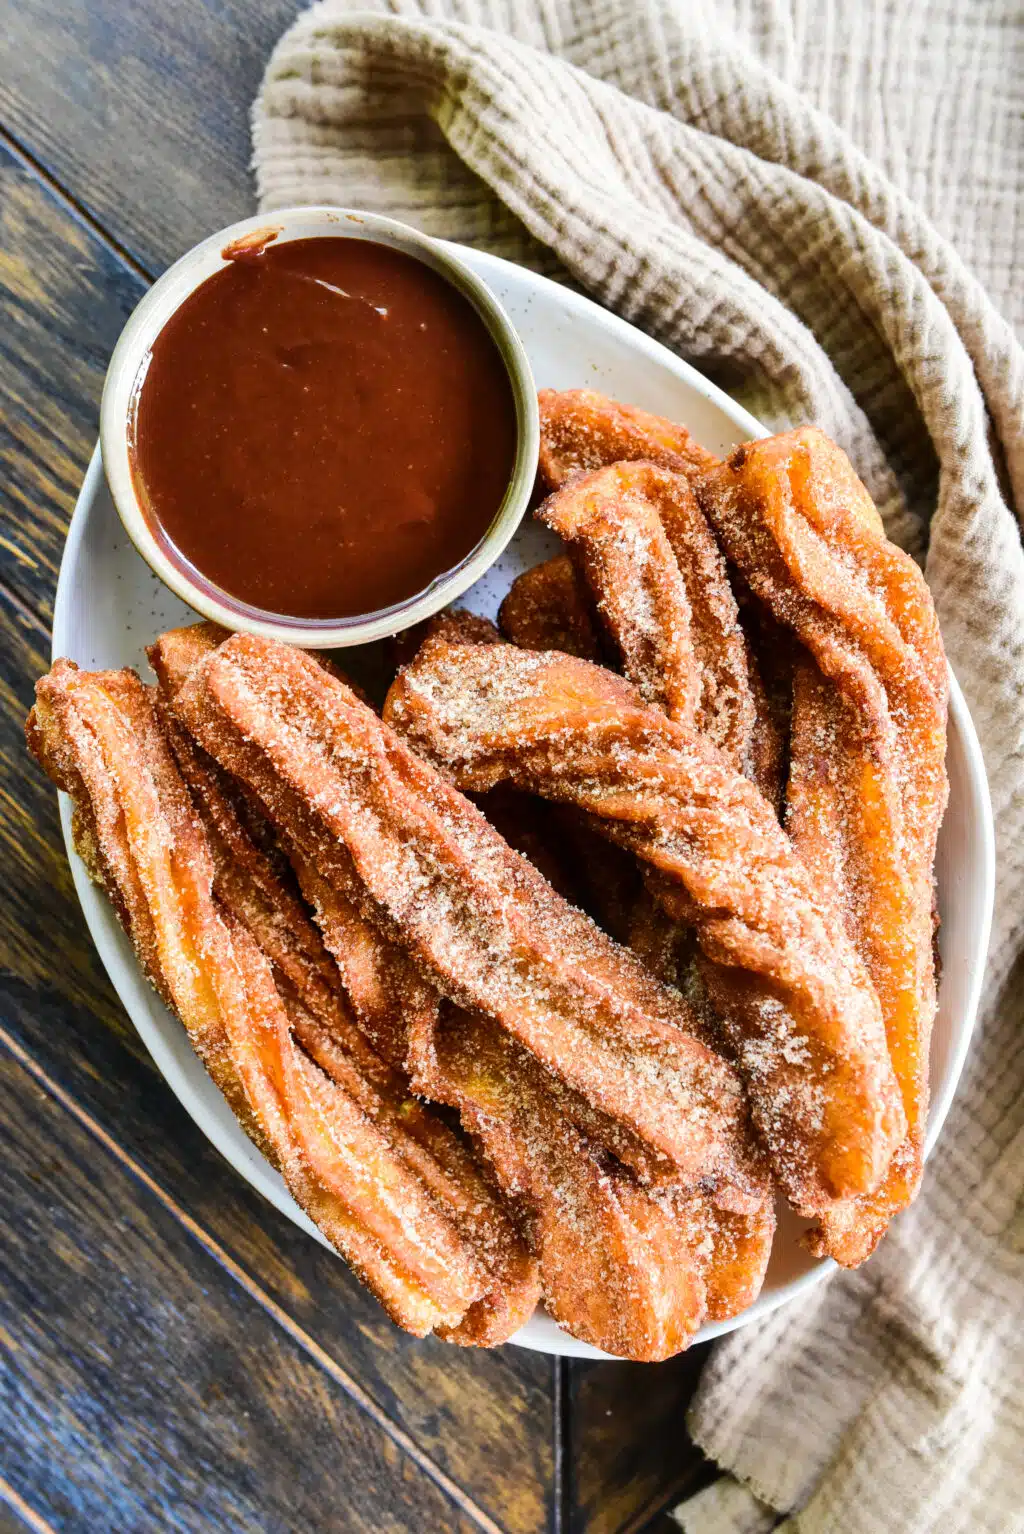 plate of churros with chocolate dipping sauce